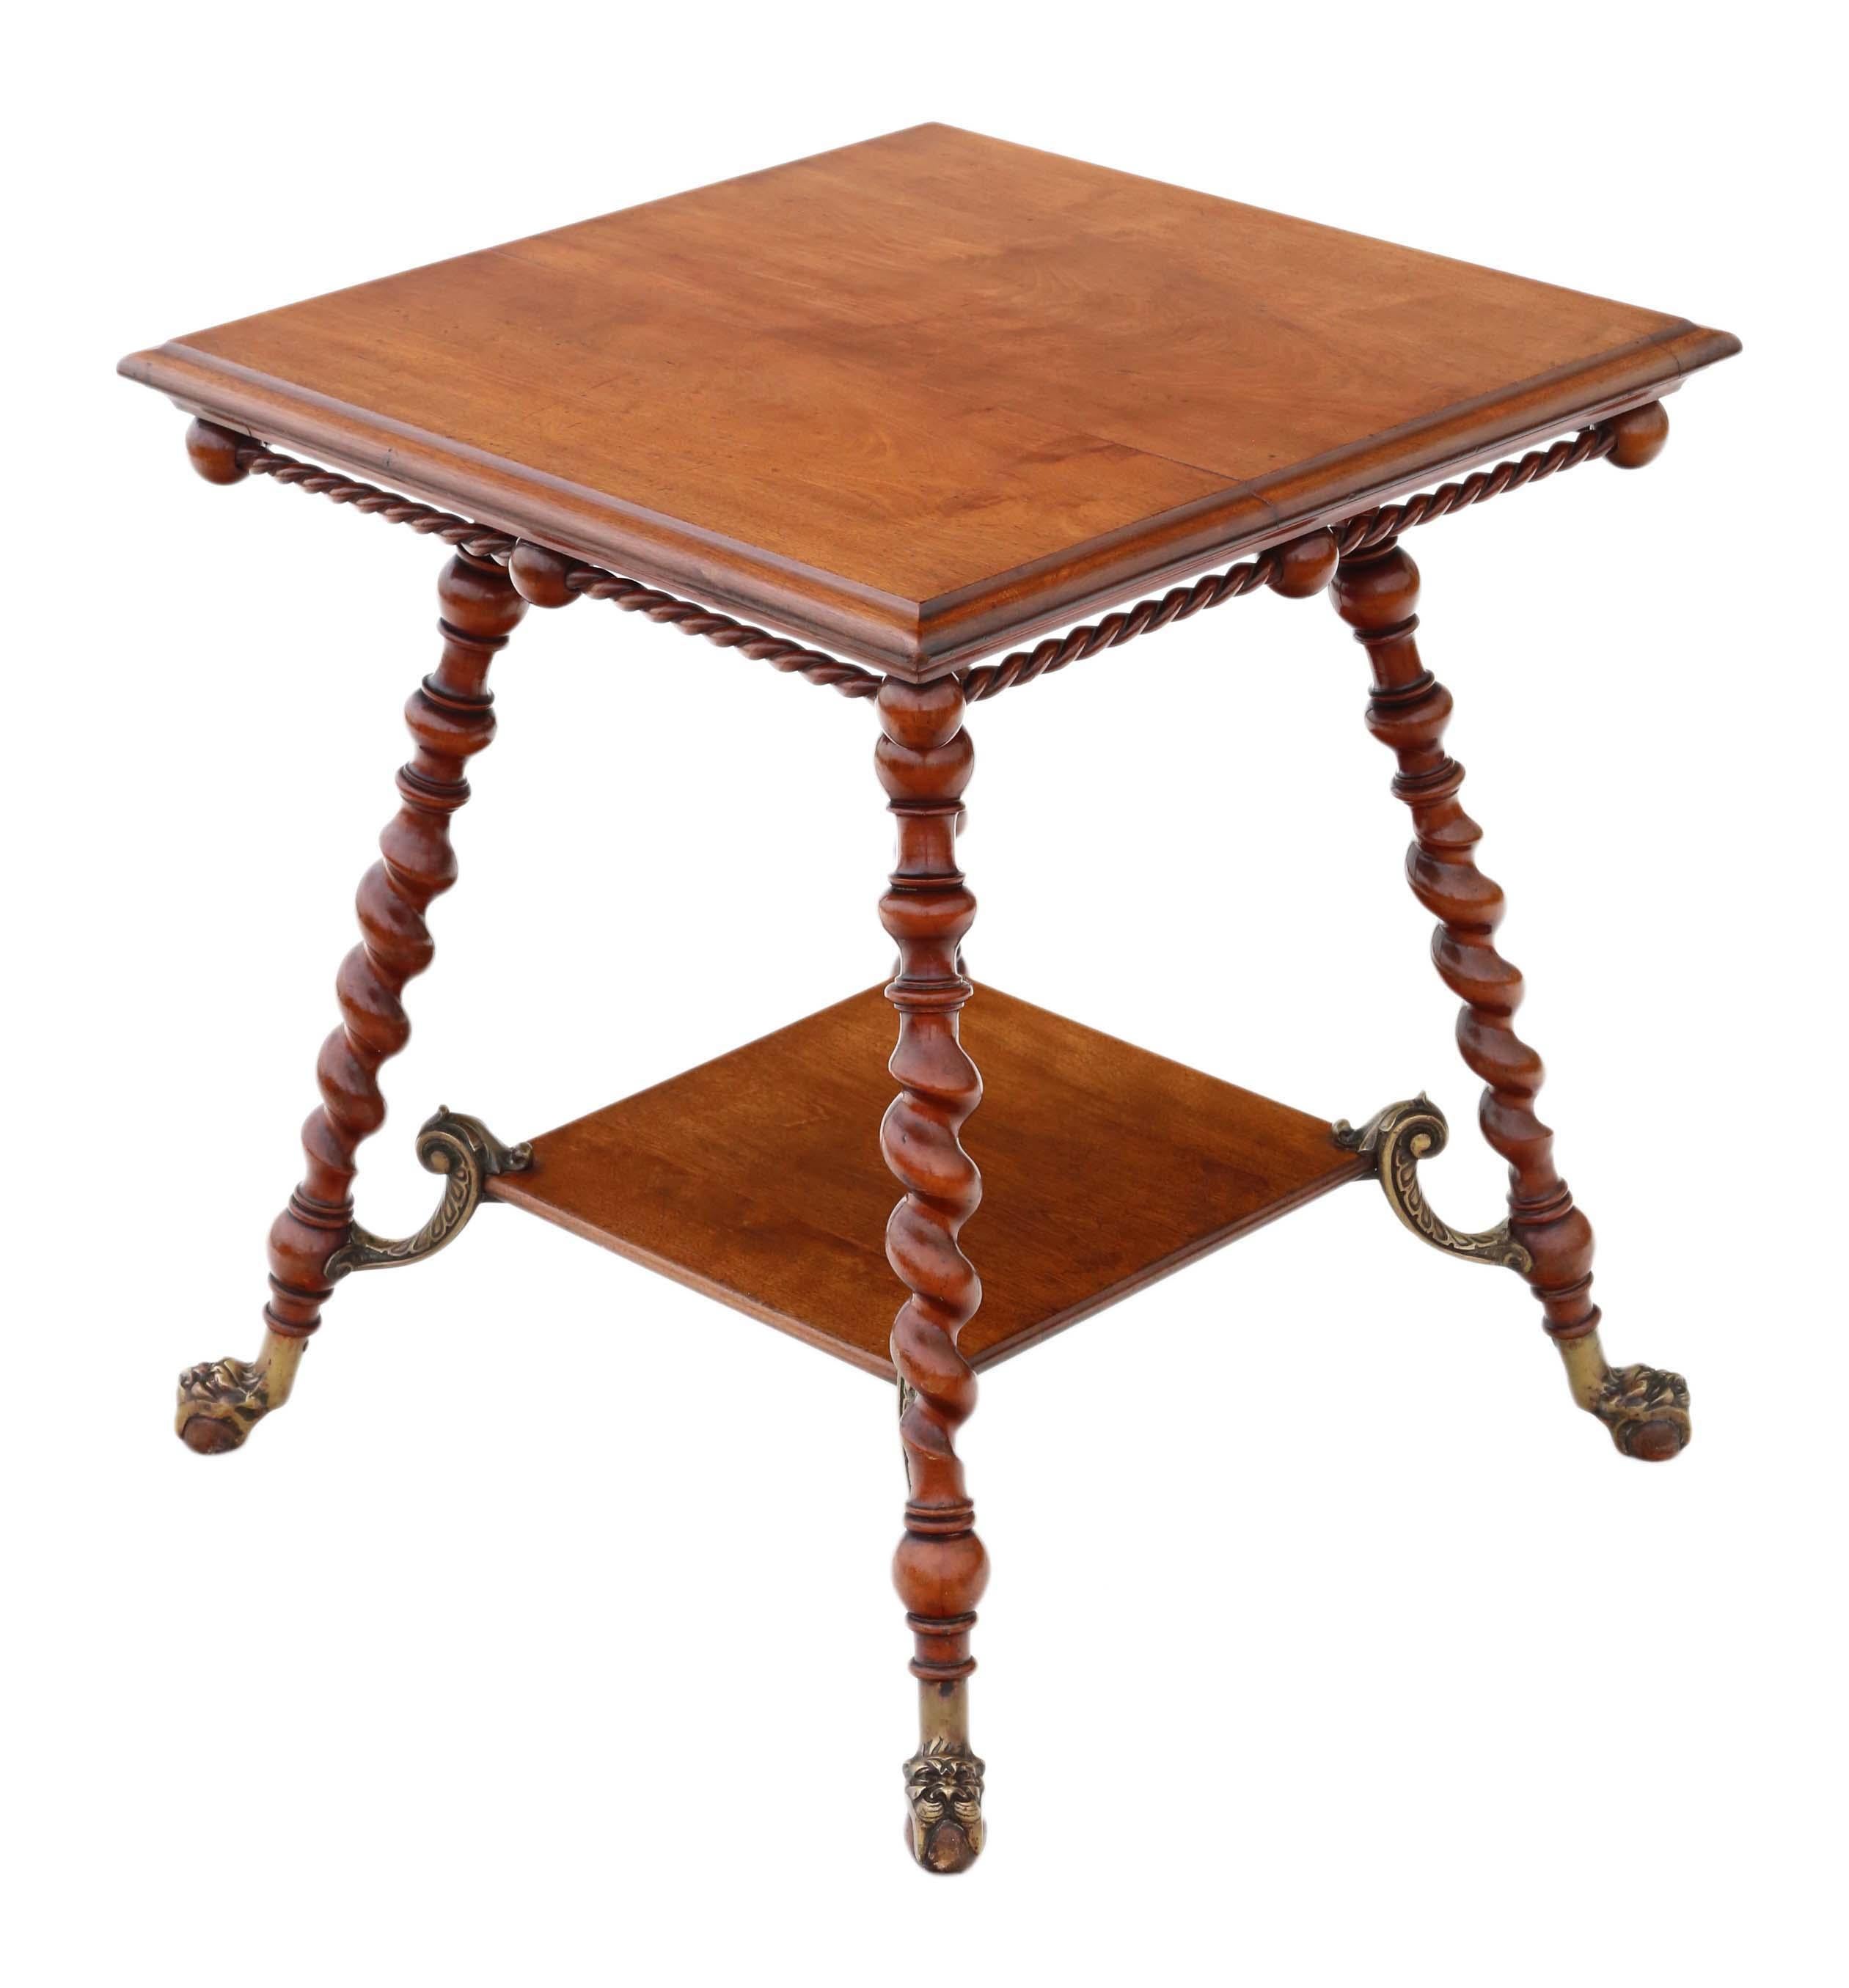 Fine Quality Victorian Red Walnut and Brass Centre Table from circa 1880-1900, A For Sale 1